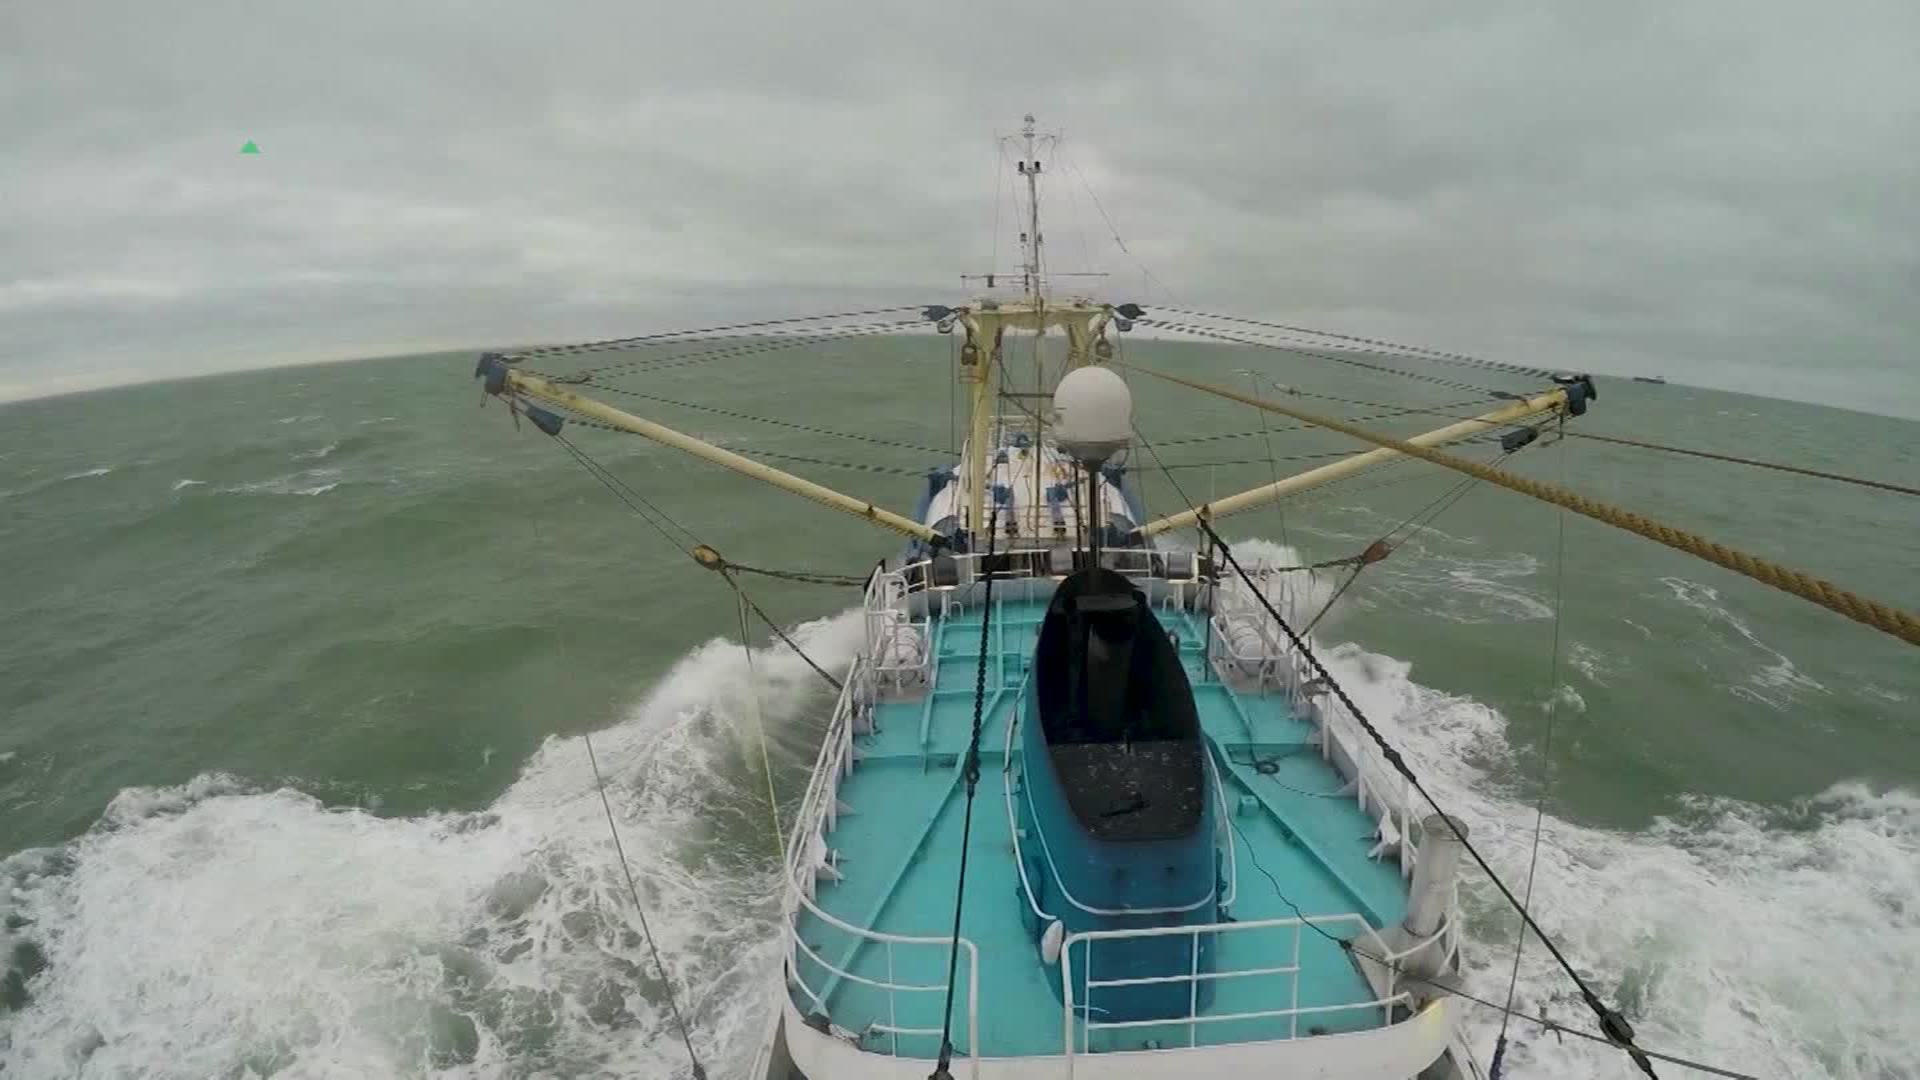 The new smart trawl net aims to change commercial fishing